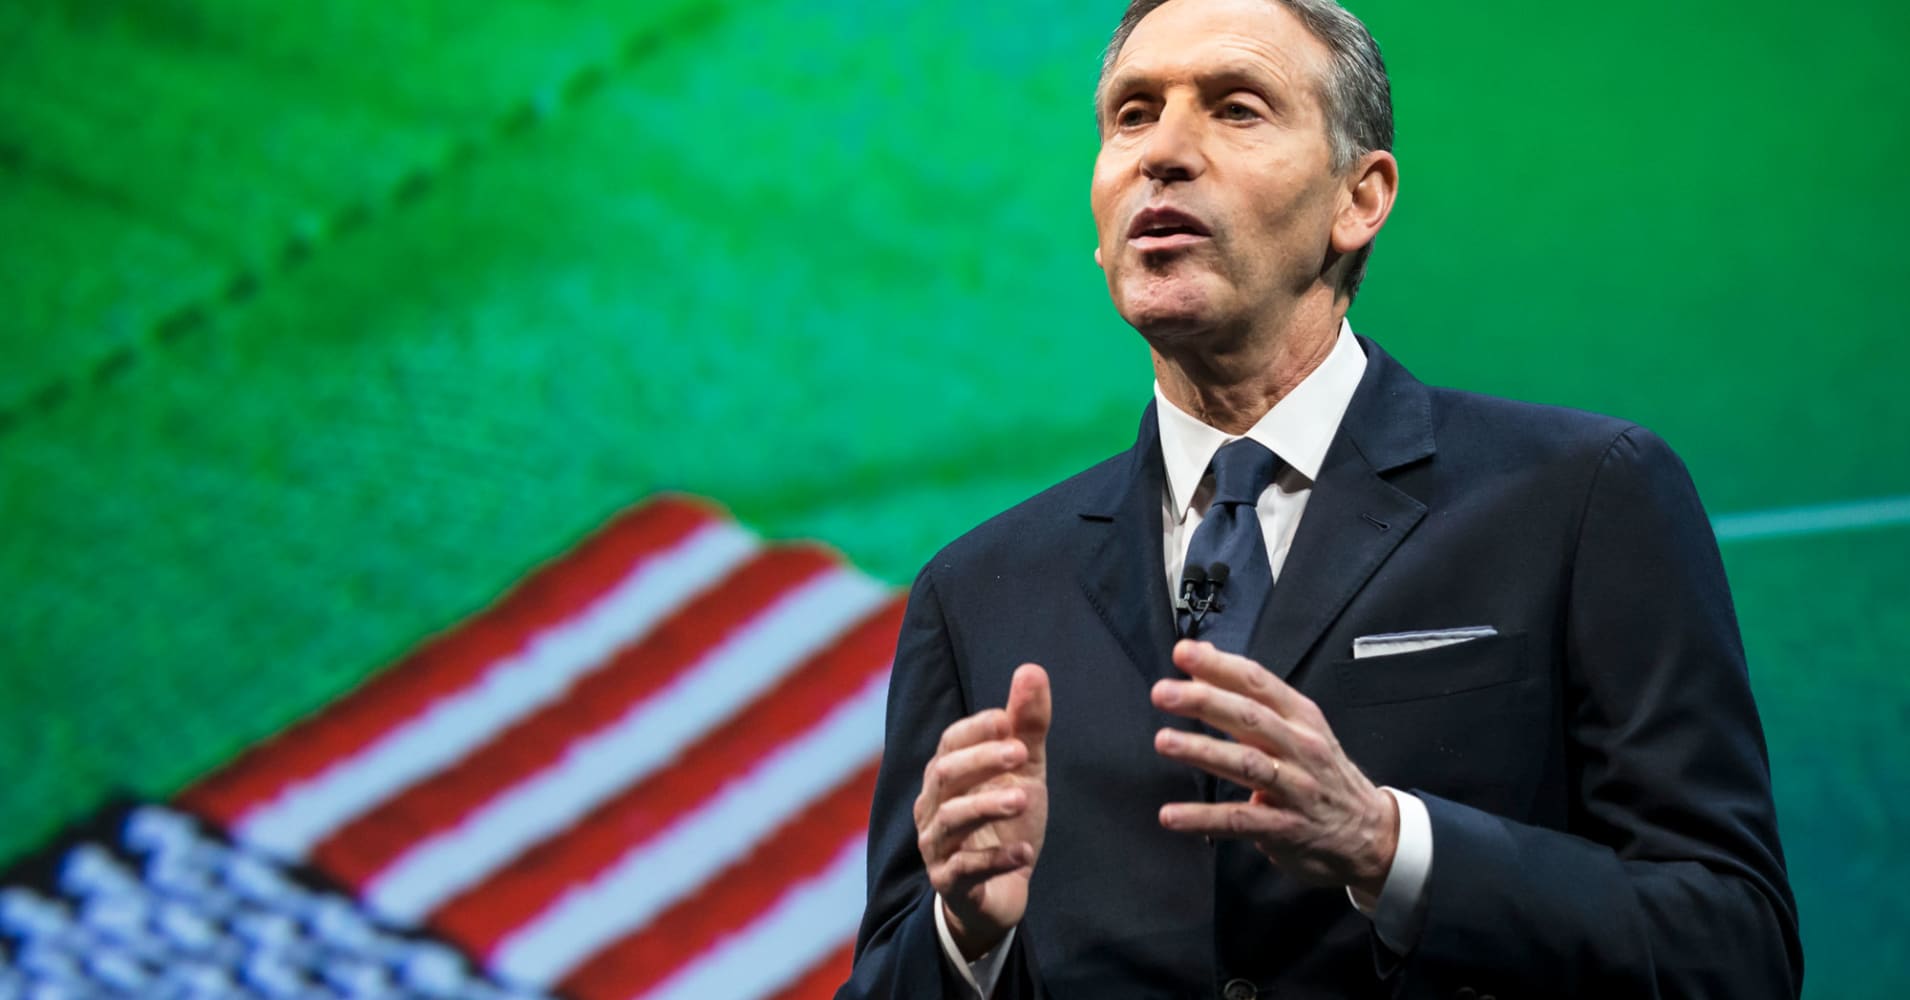 Former Starbucks CEO hires ex-Obama aide as communications advisor as he mulls presidential run